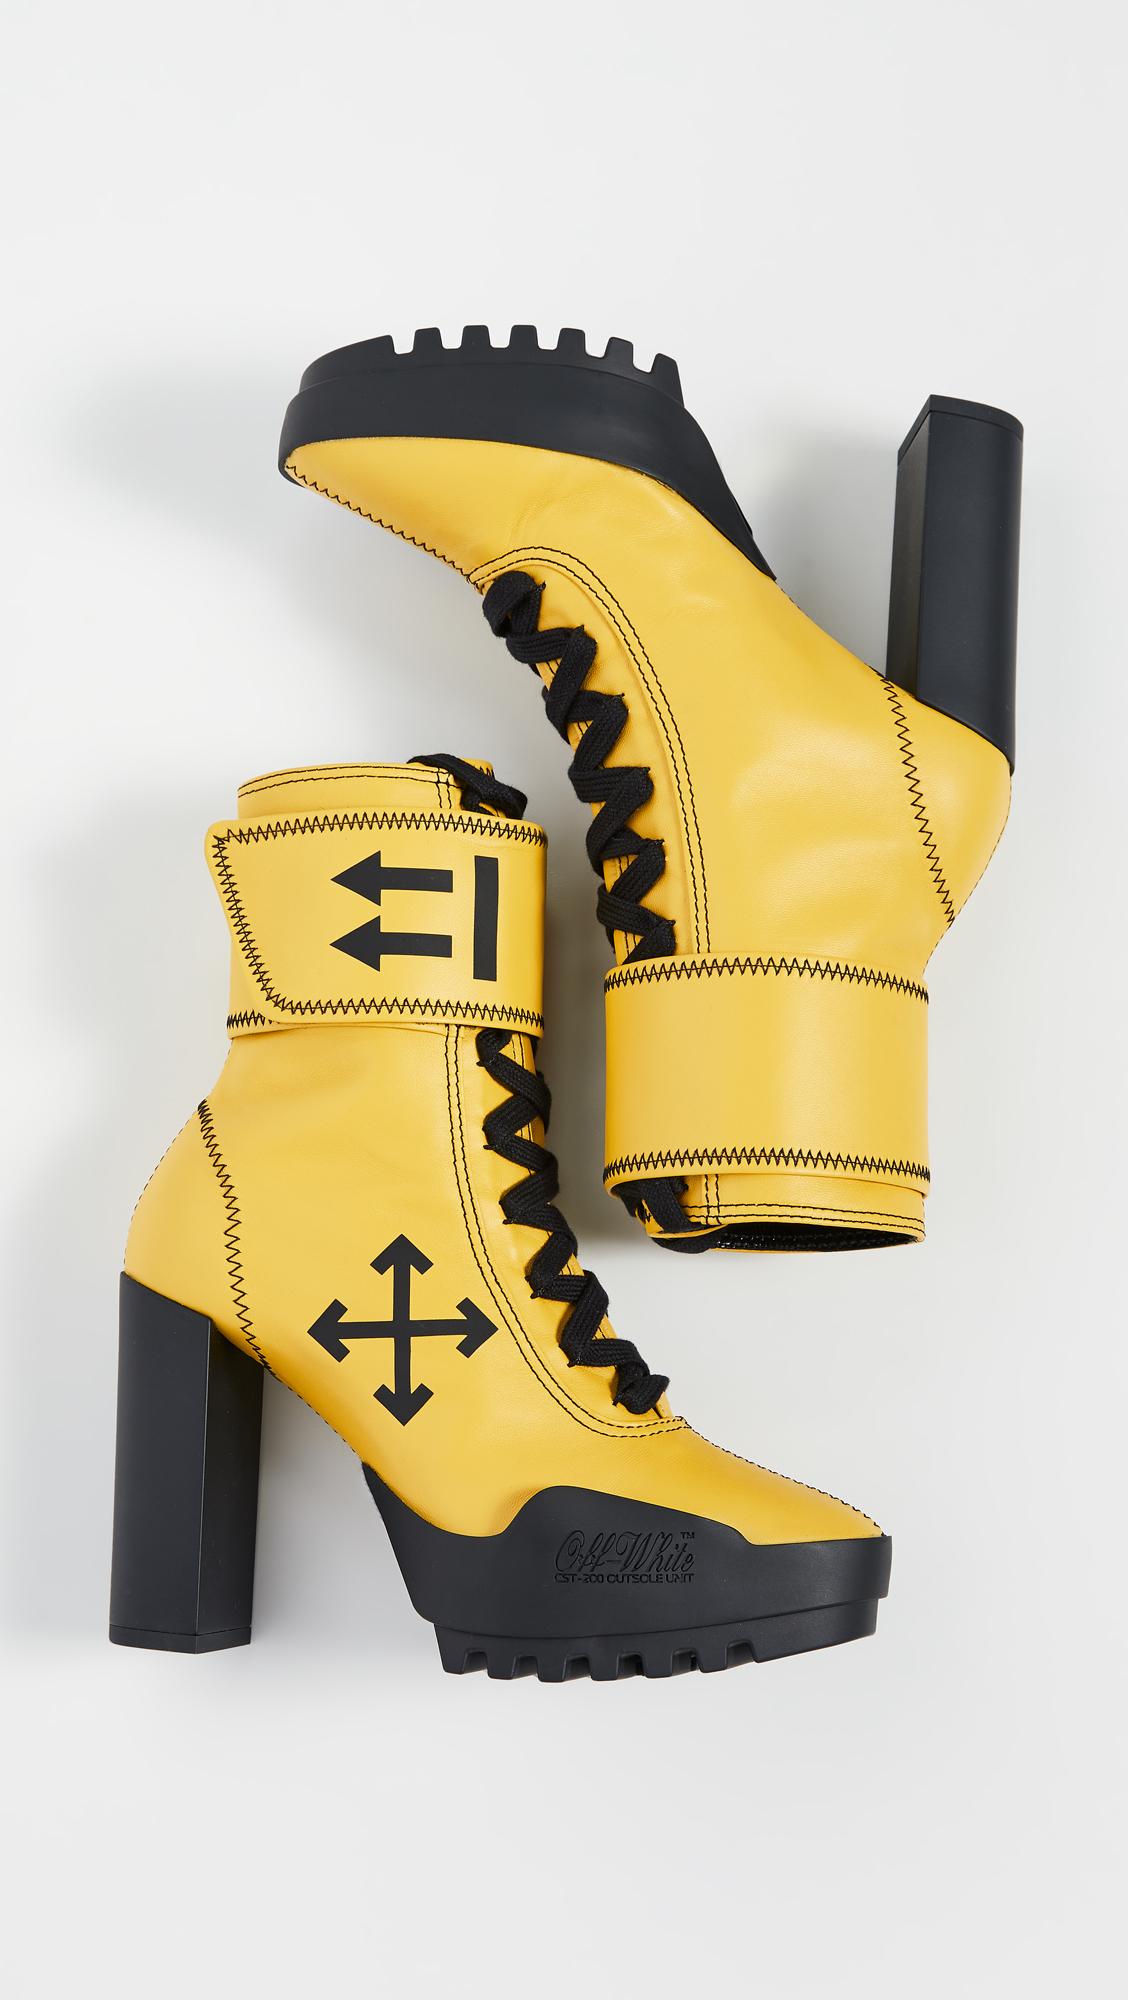 Off-White c/o Virgil Abloh Leather Arrow Heeled Moto Wrap Boots in 